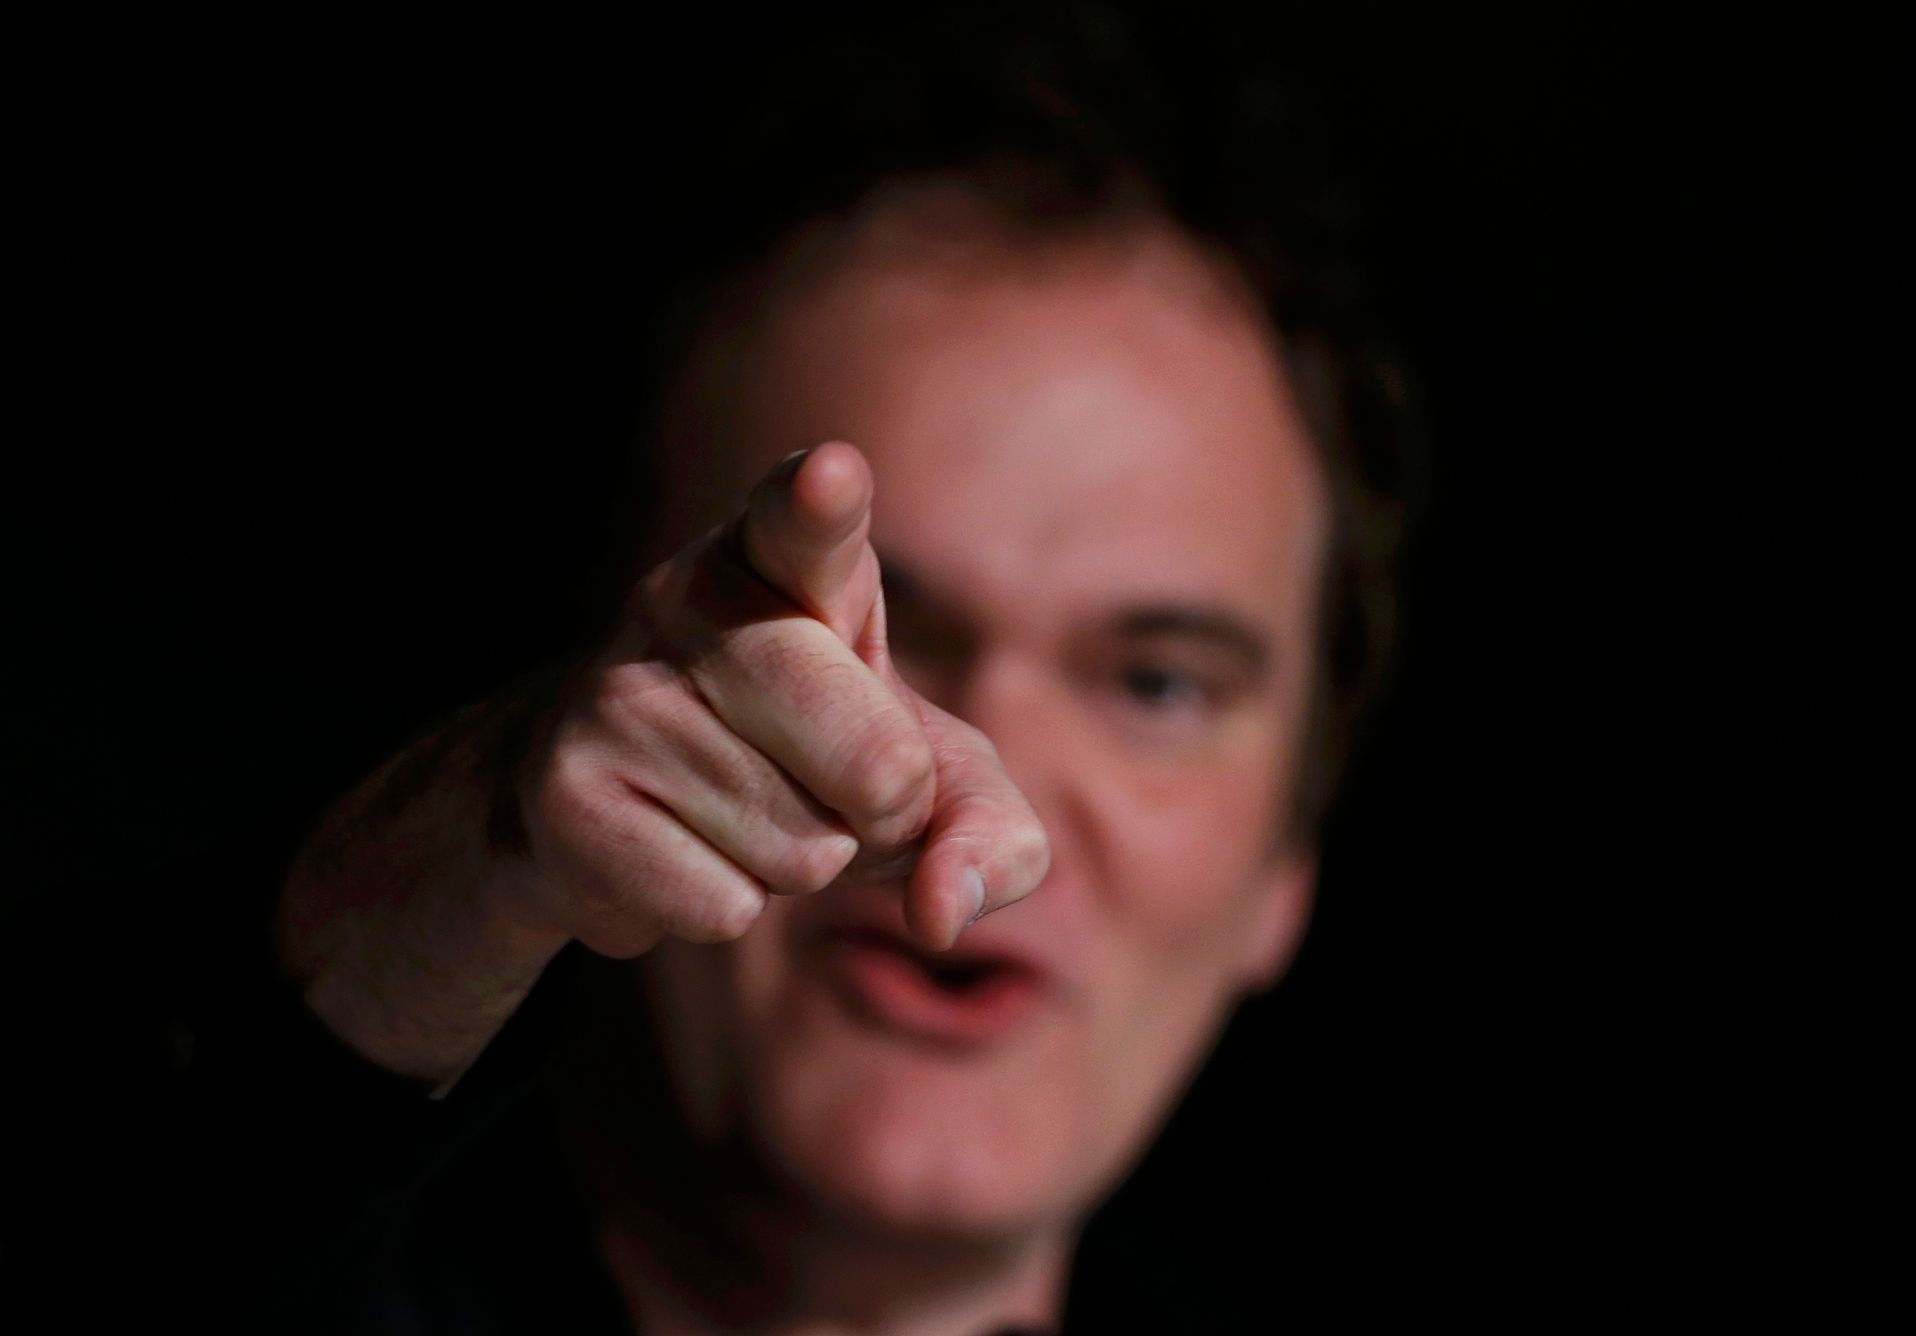 Director Quentin Tarantino attends a news conference during the 67th Cannes Film Festival in Cannes